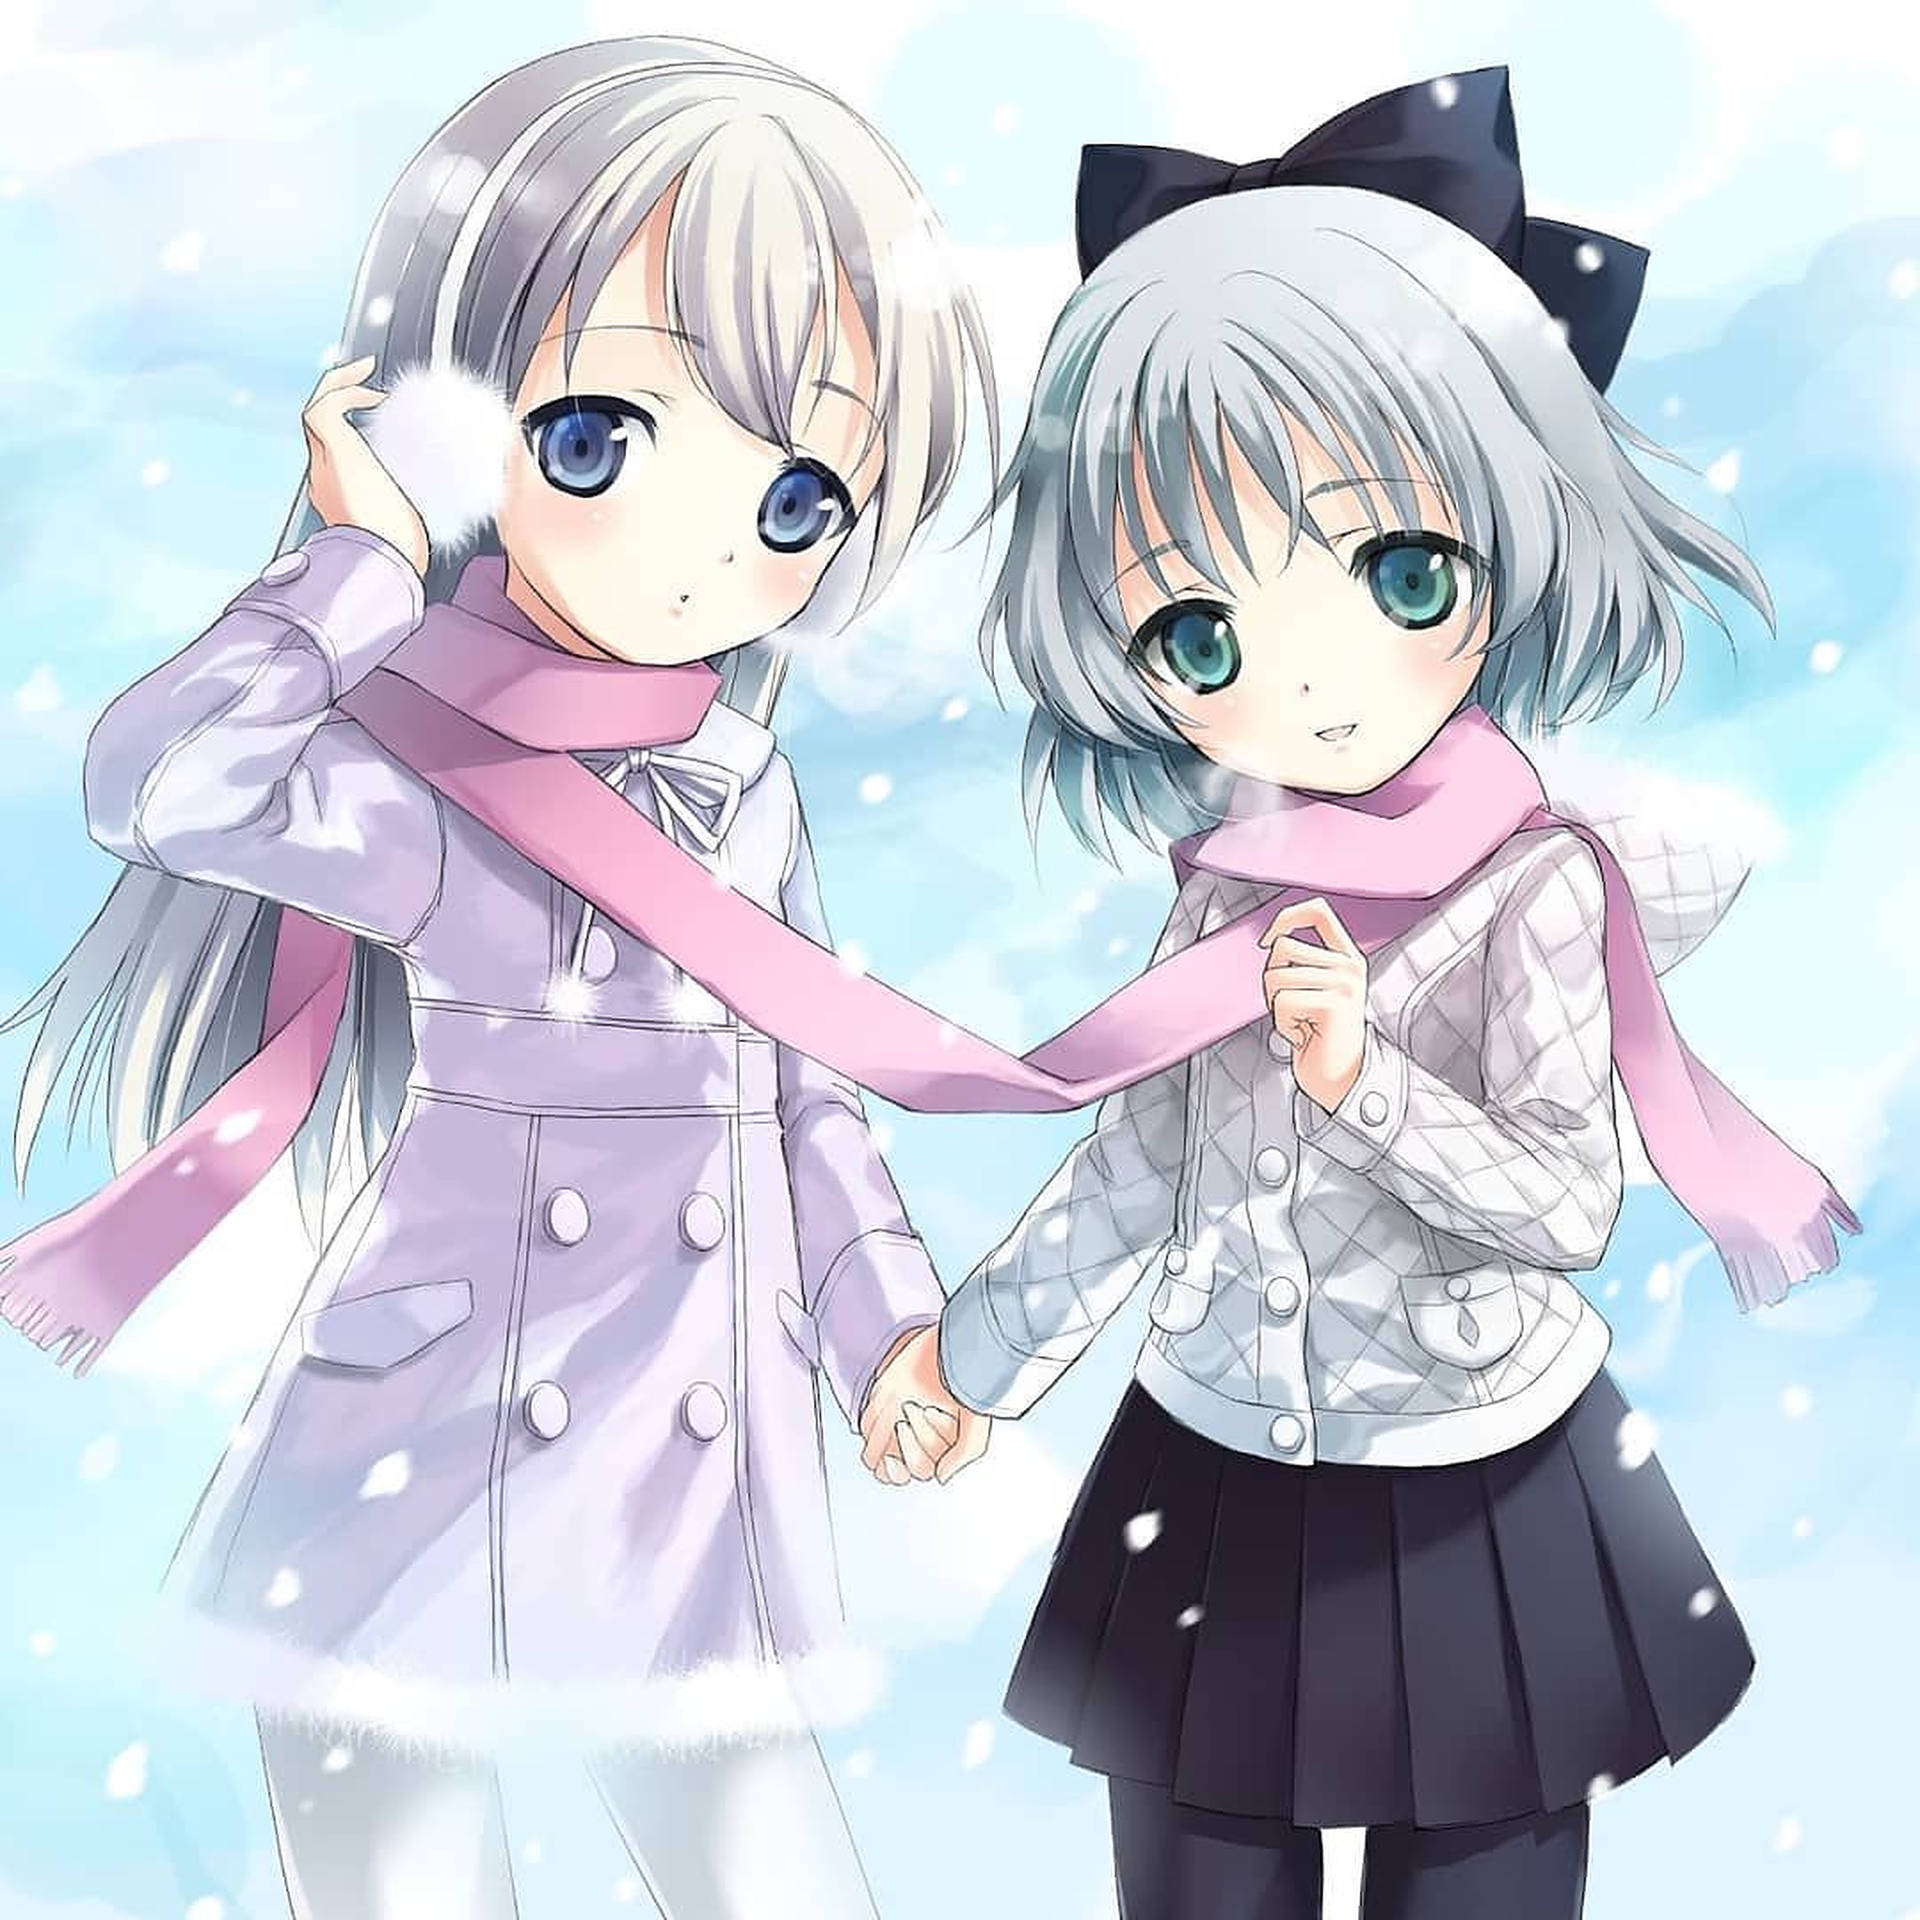 Download Anime Kids Winter Clothes Wallpaper 